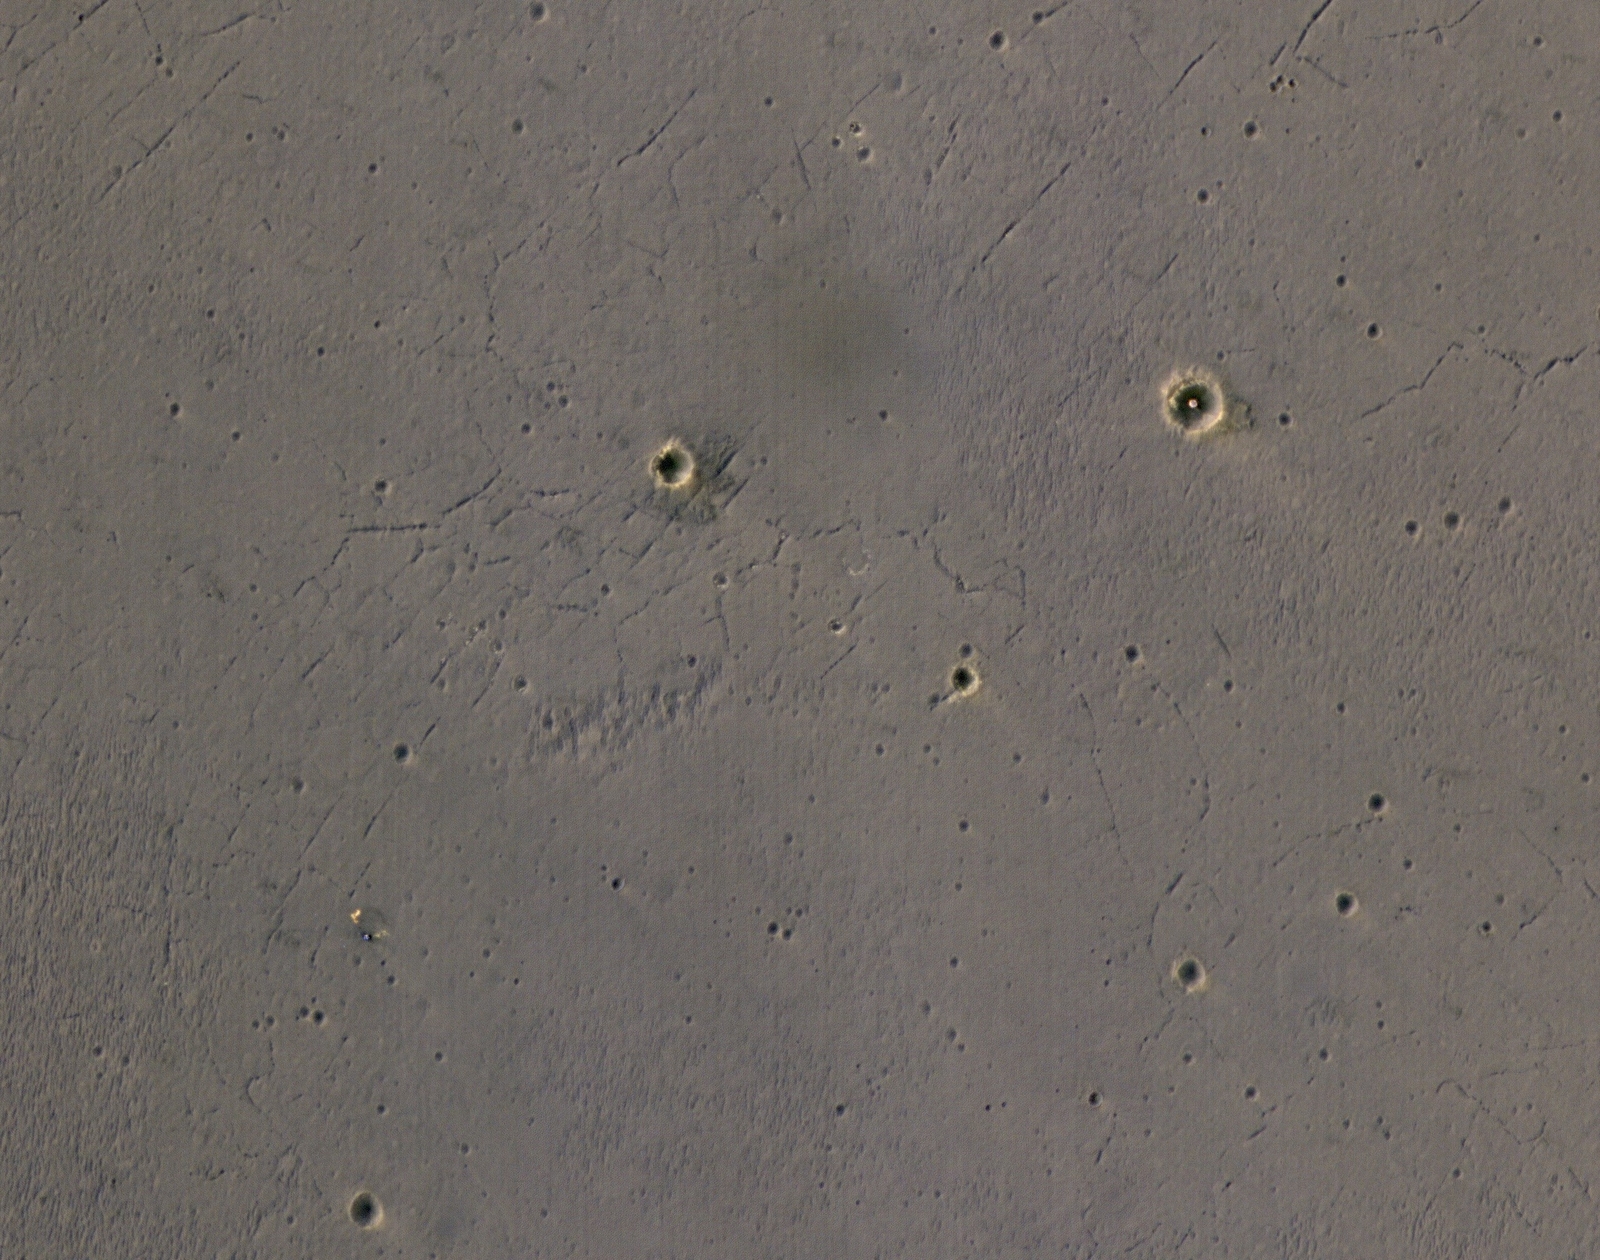 Rover's Landing Hardware at Eagle Crater, Mars